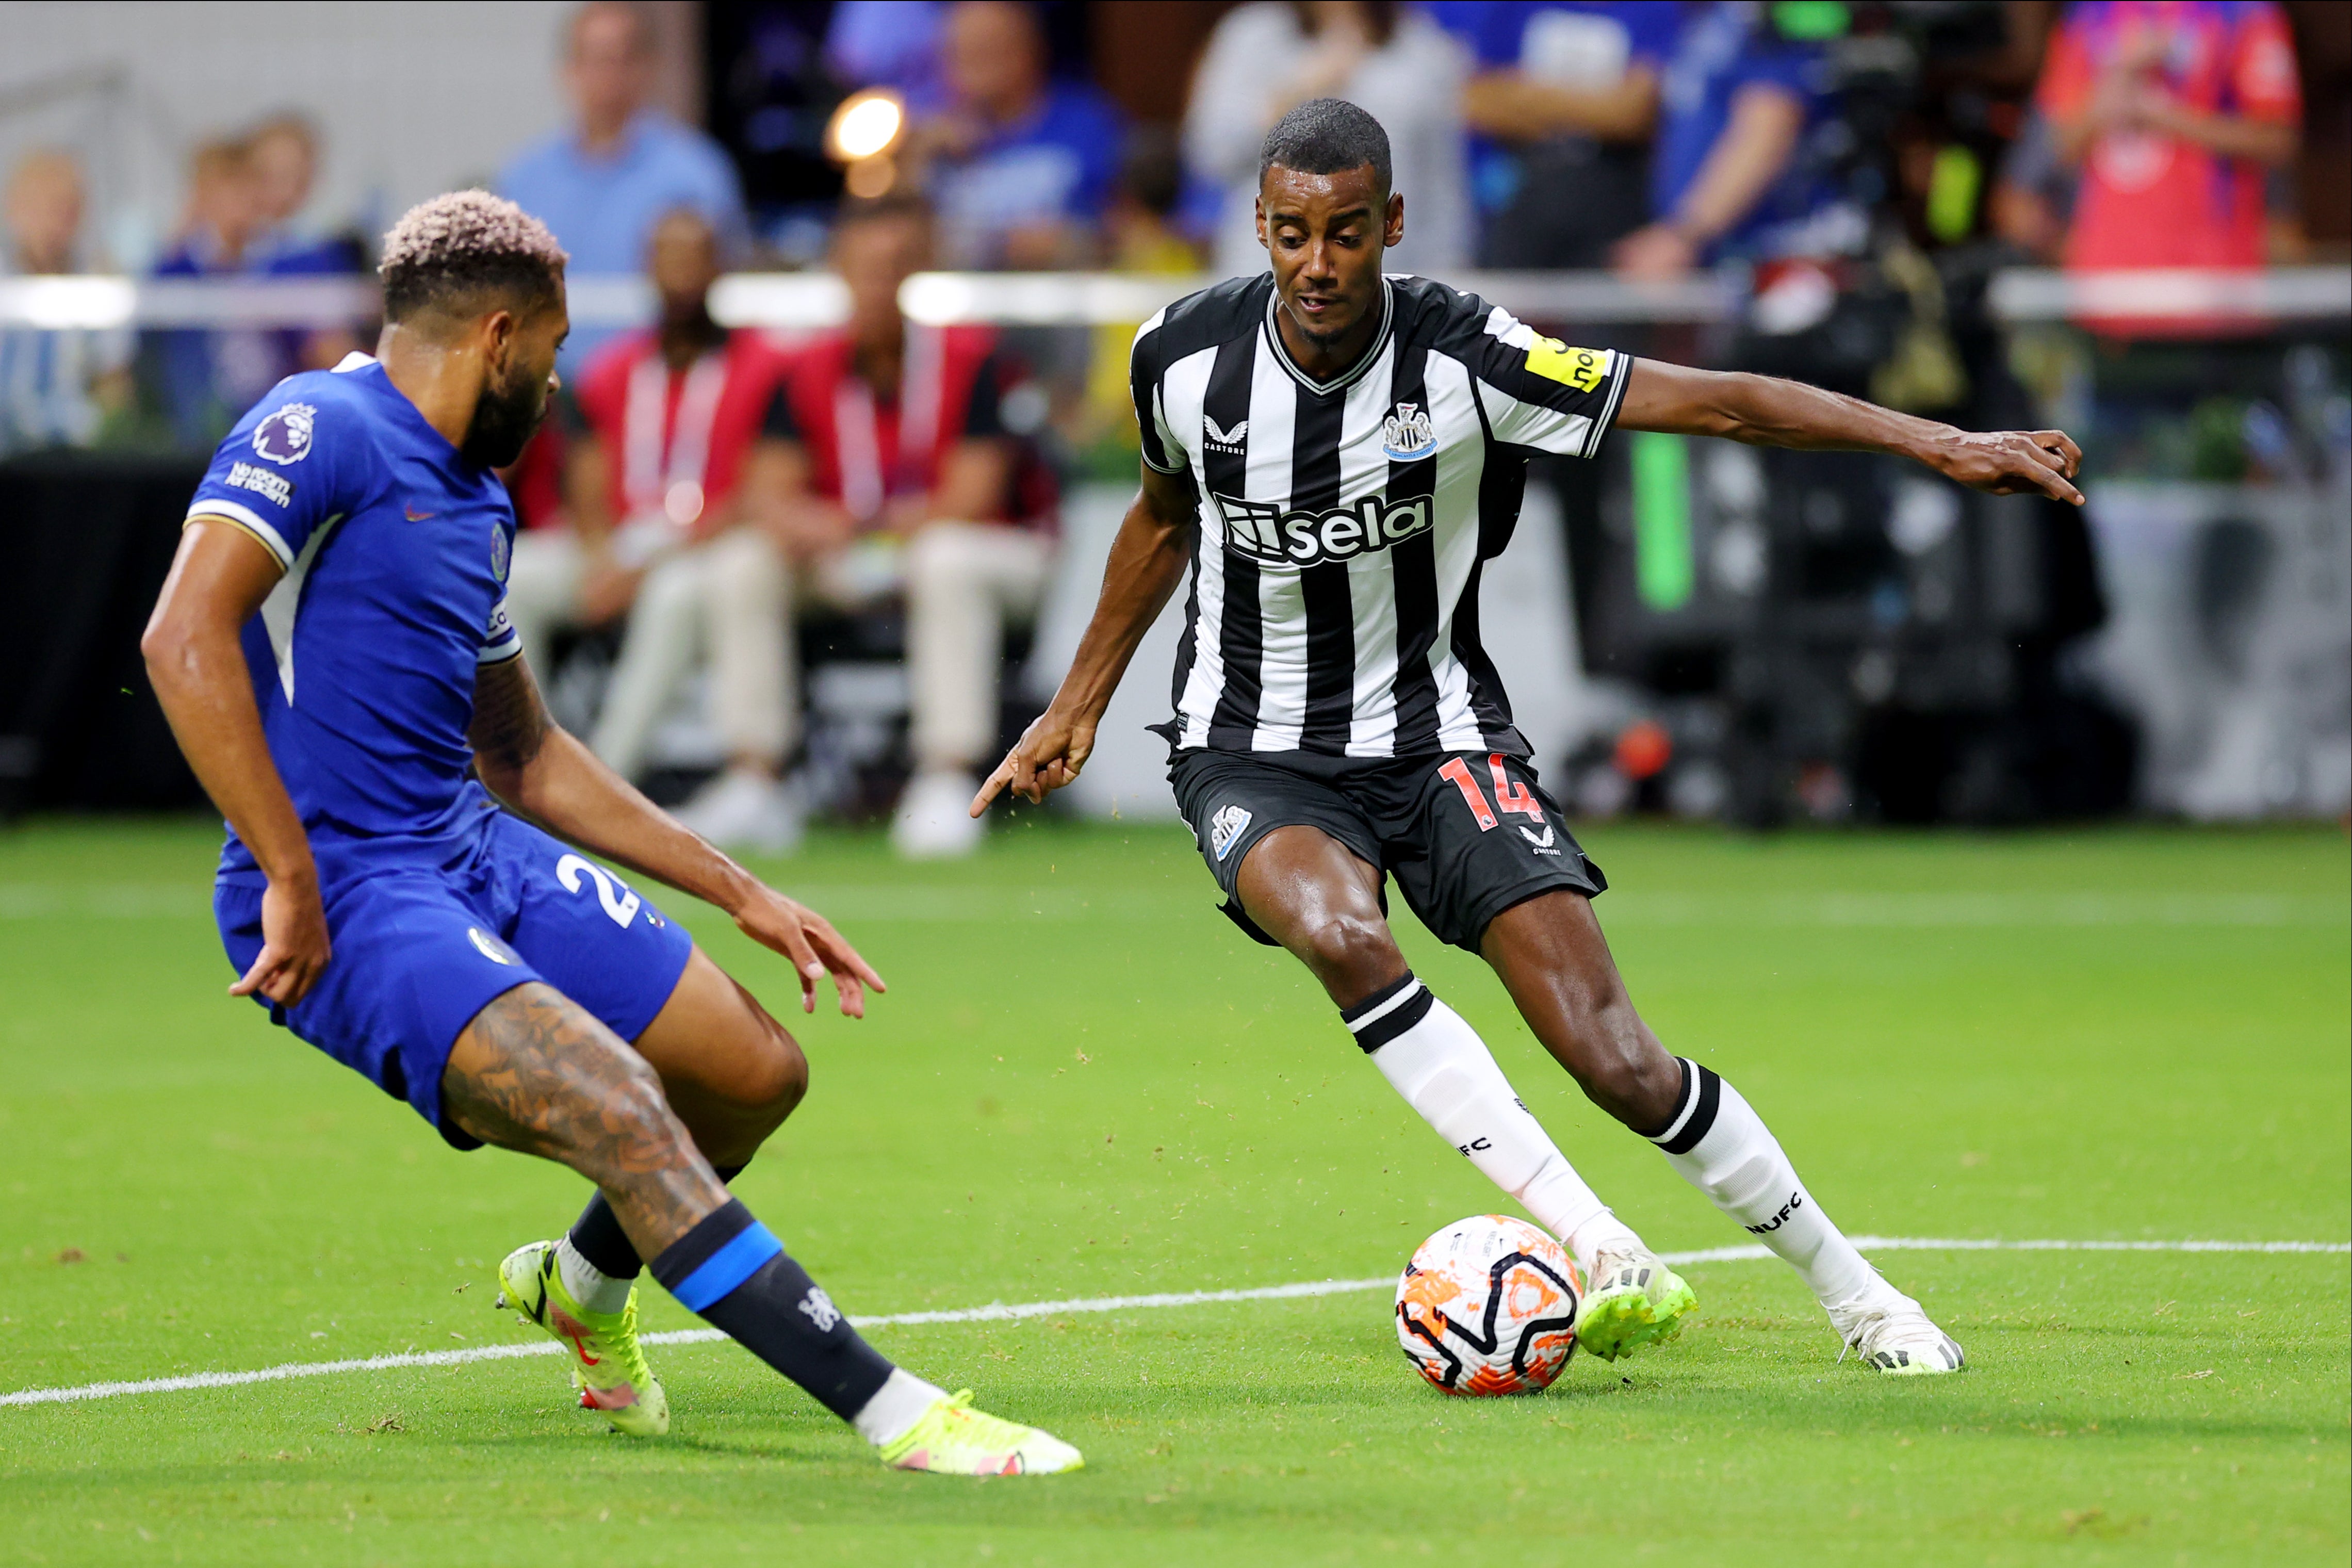 Newcastle vs Chelsea predicted line-ups: Team news ahead of Premier League fixture | The Independent